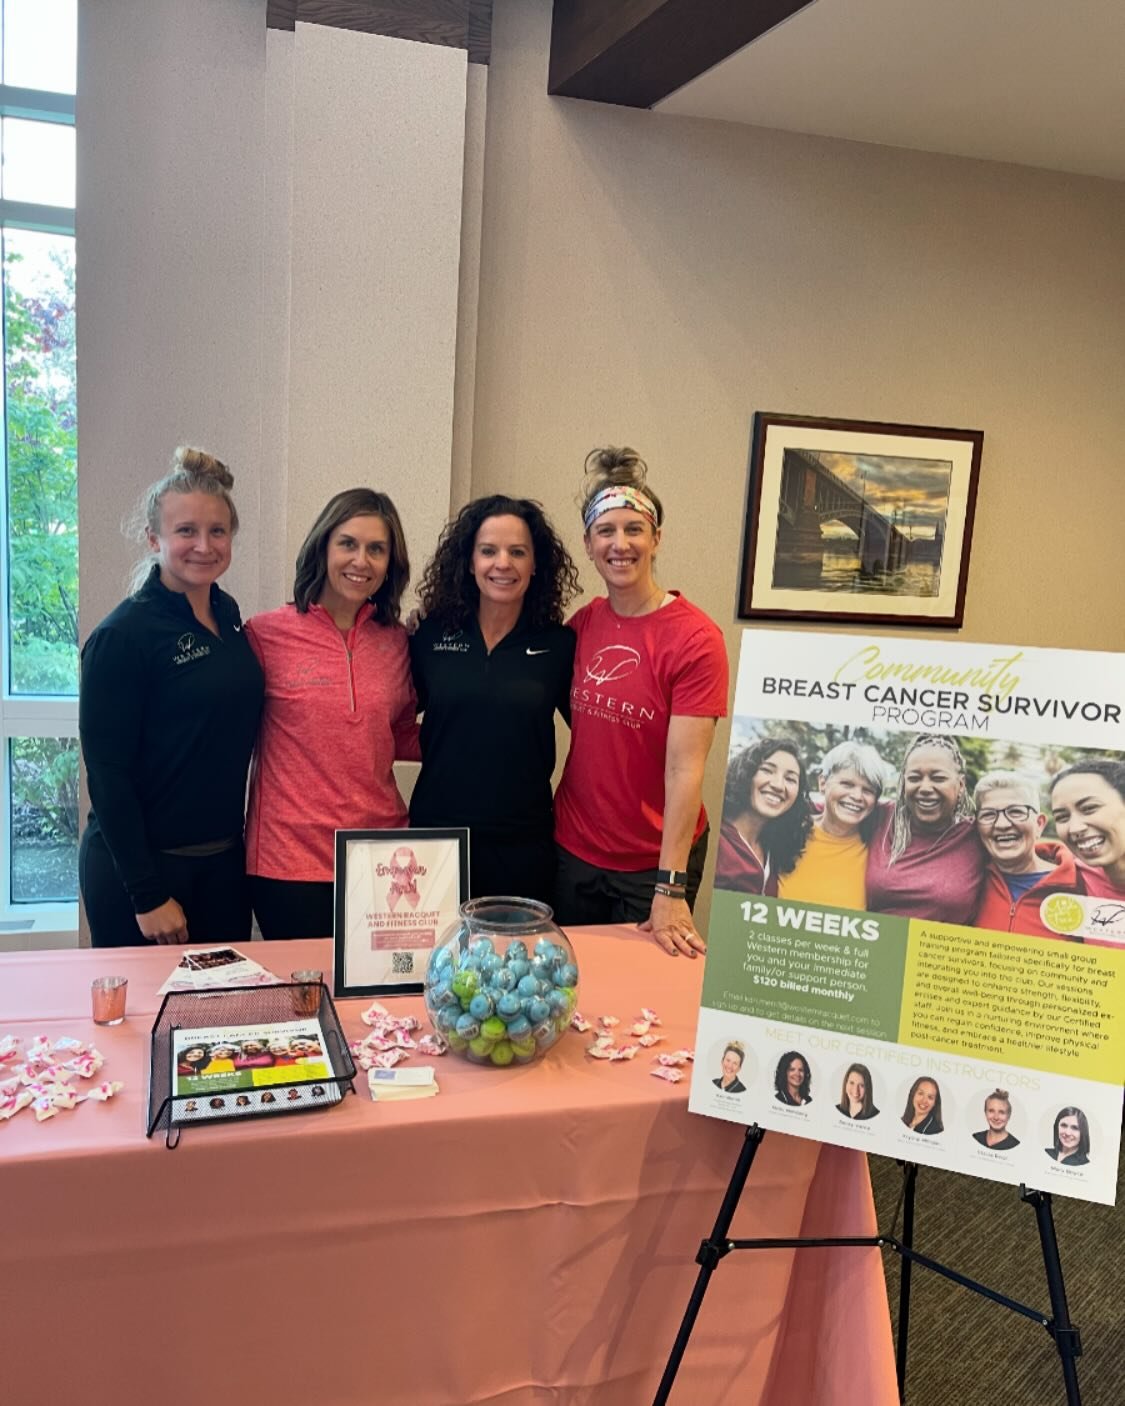 Some of our Oncology Exercise Instructors were invited to spend some time and make some amazing connections at Empower Pink Breast Cancer Resource Fair last night 

We are excited to kick off our Breast Cancer Survivorship 12 week program which gives